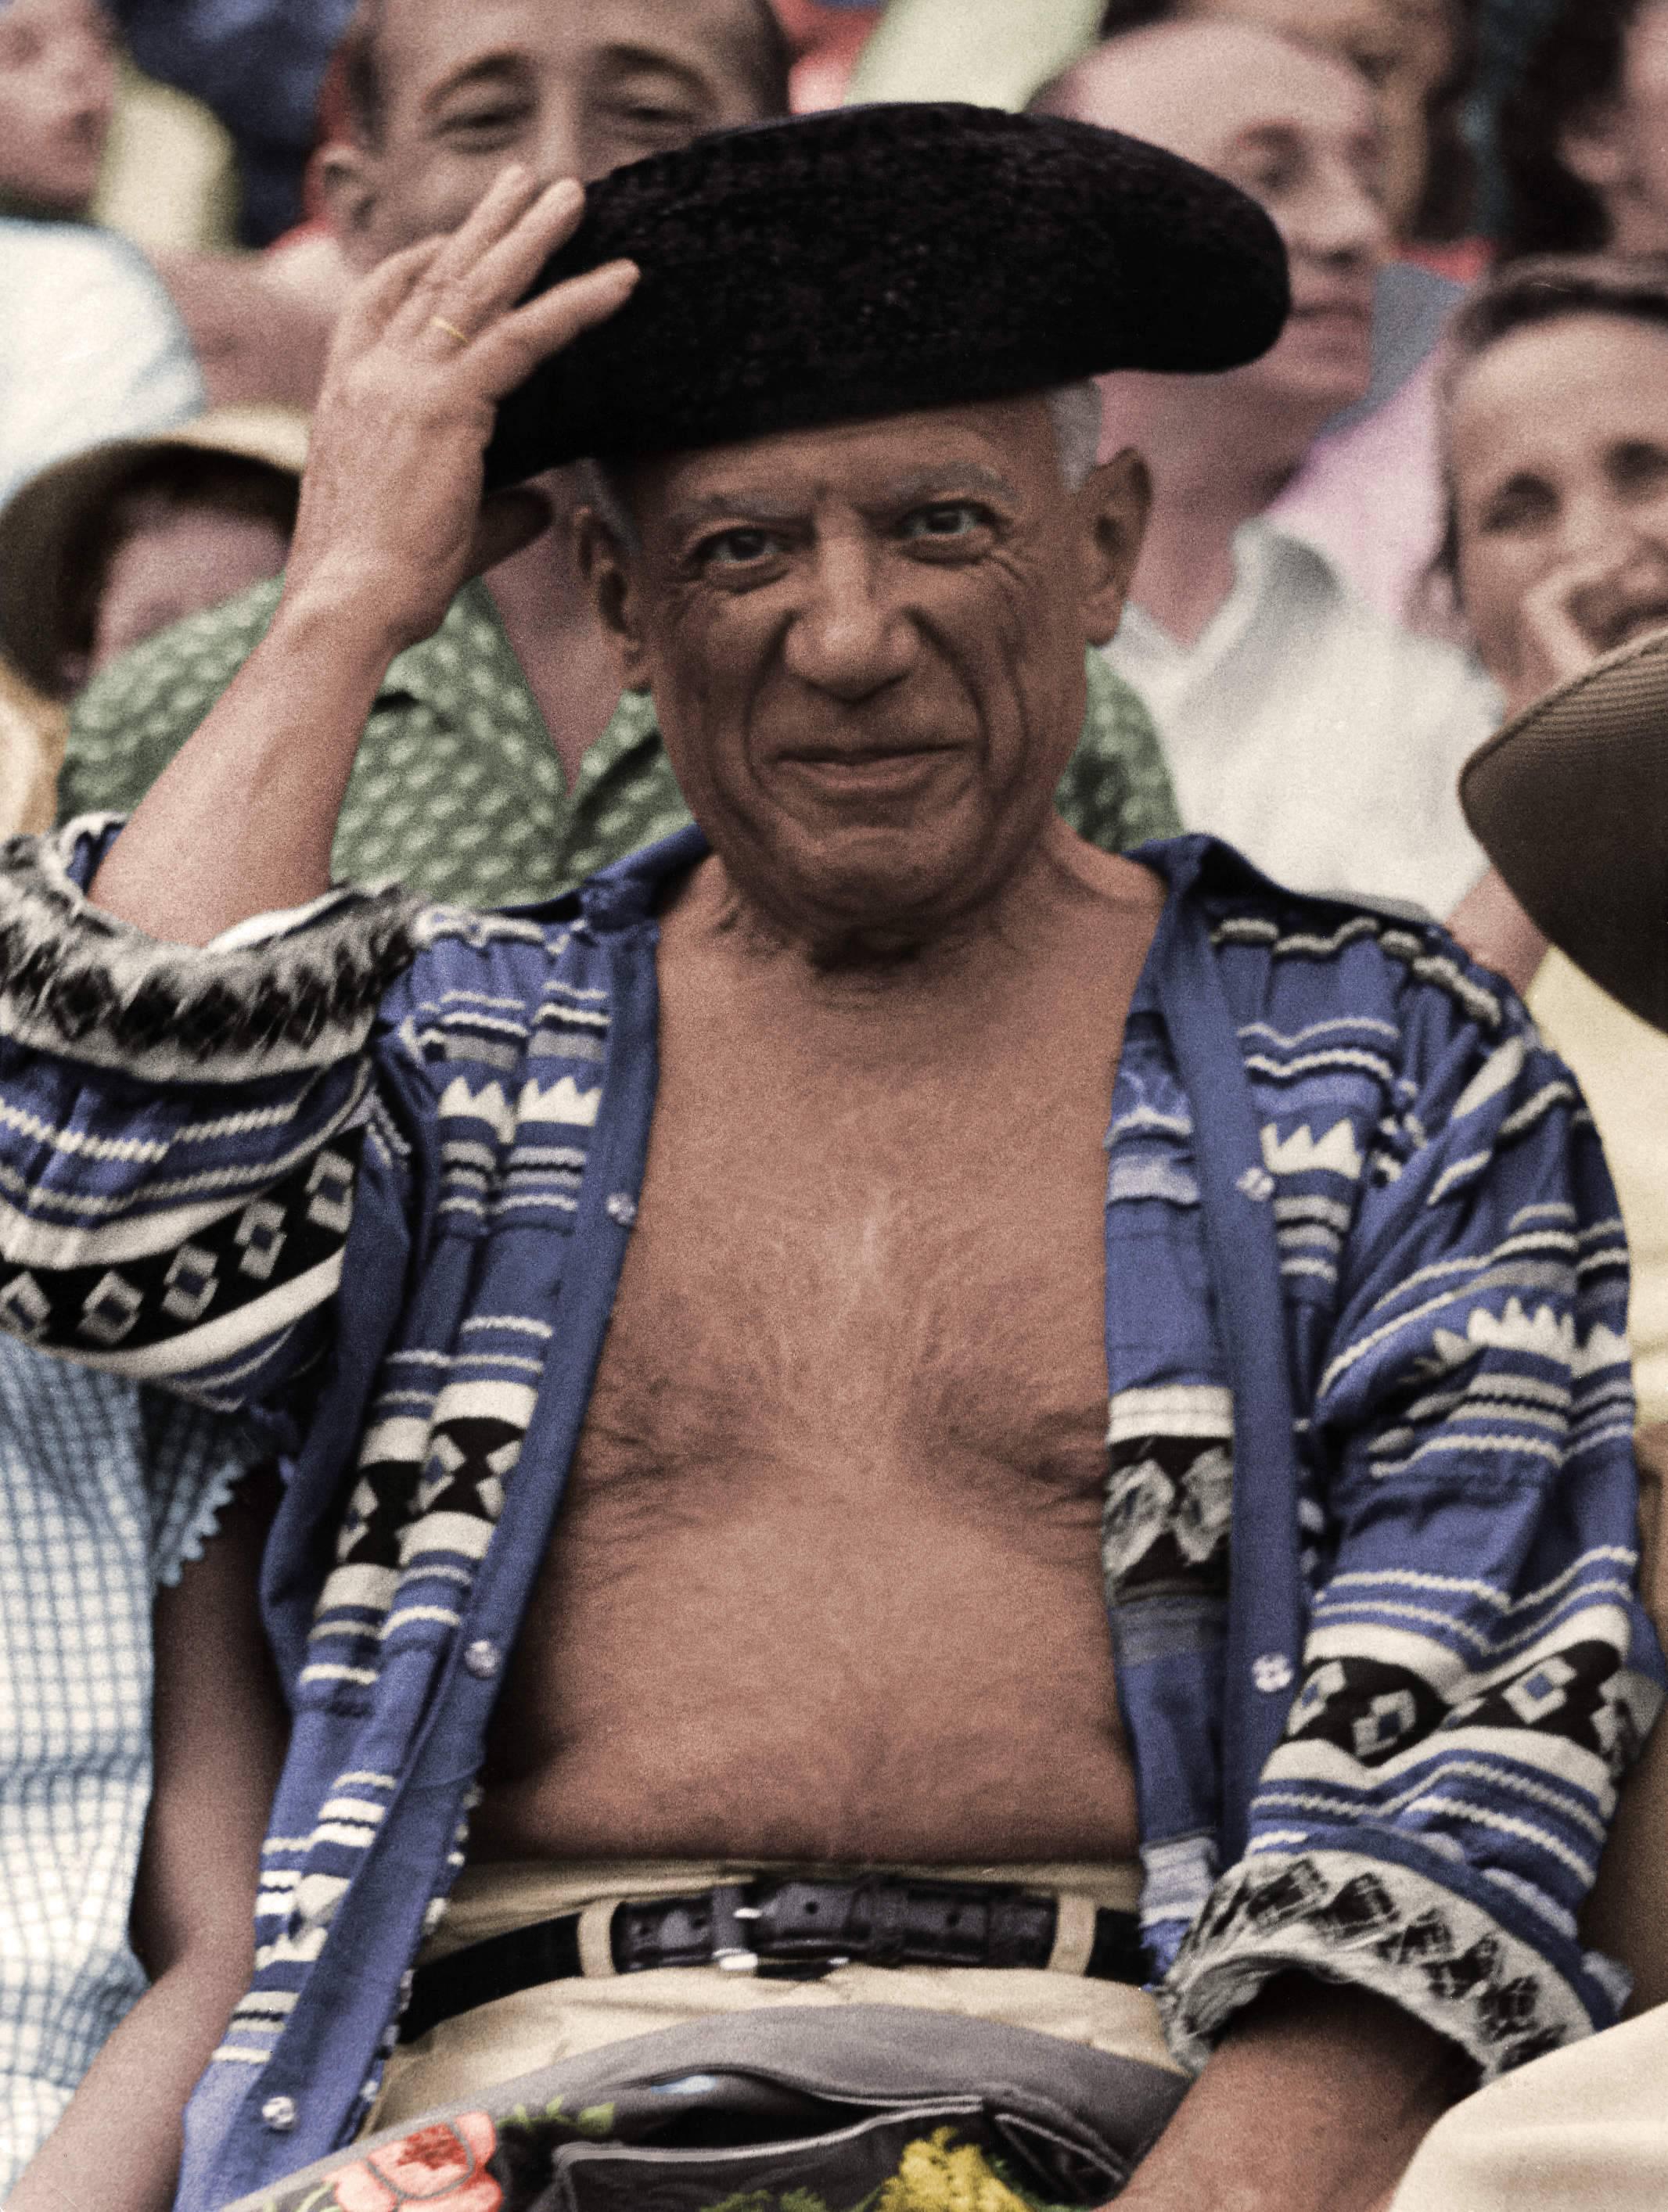 Unknown Color Photograph - Pablo Picasso at the Bullfights, Colorized Fine Art Print